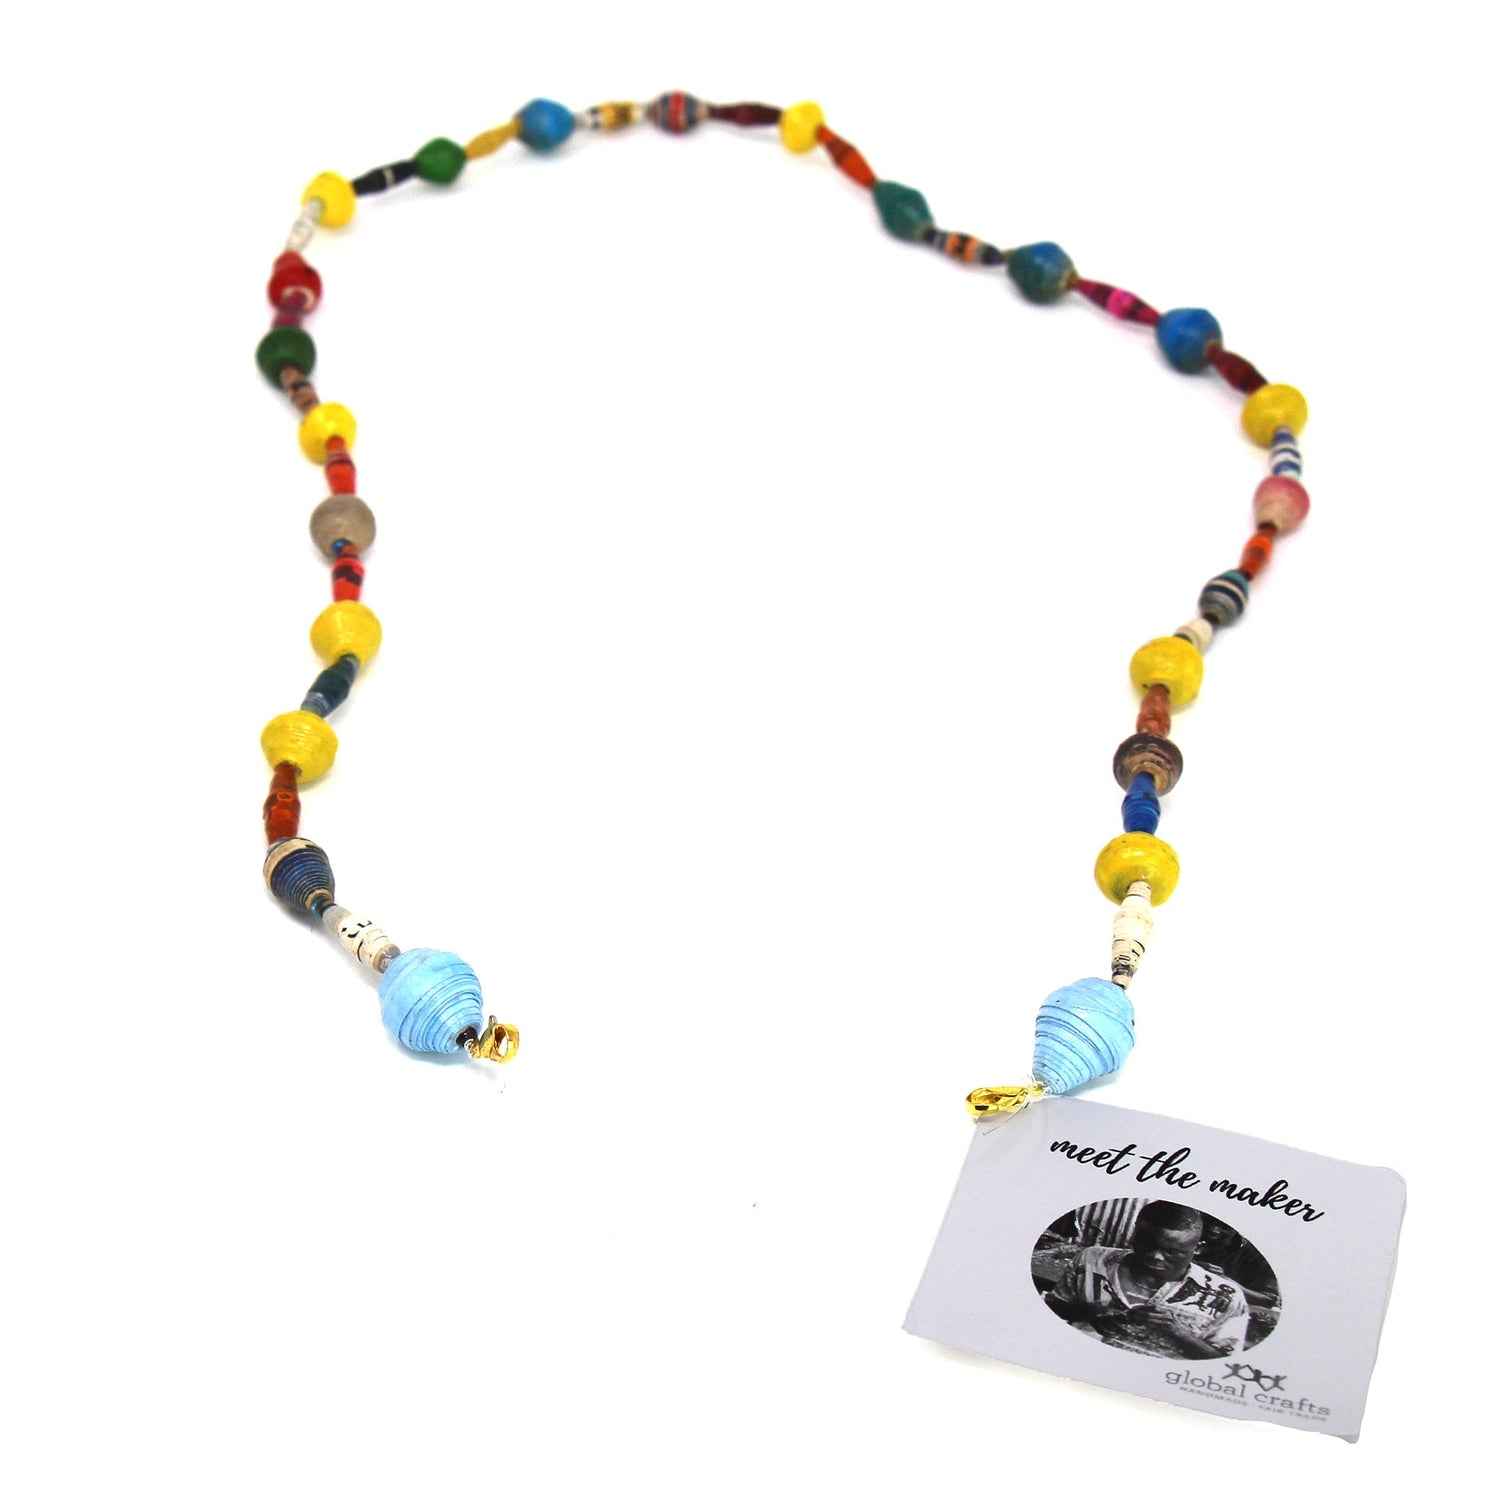 face-mask-eyeglass-paper-bead-chain-colorful-mixed-shapes-2